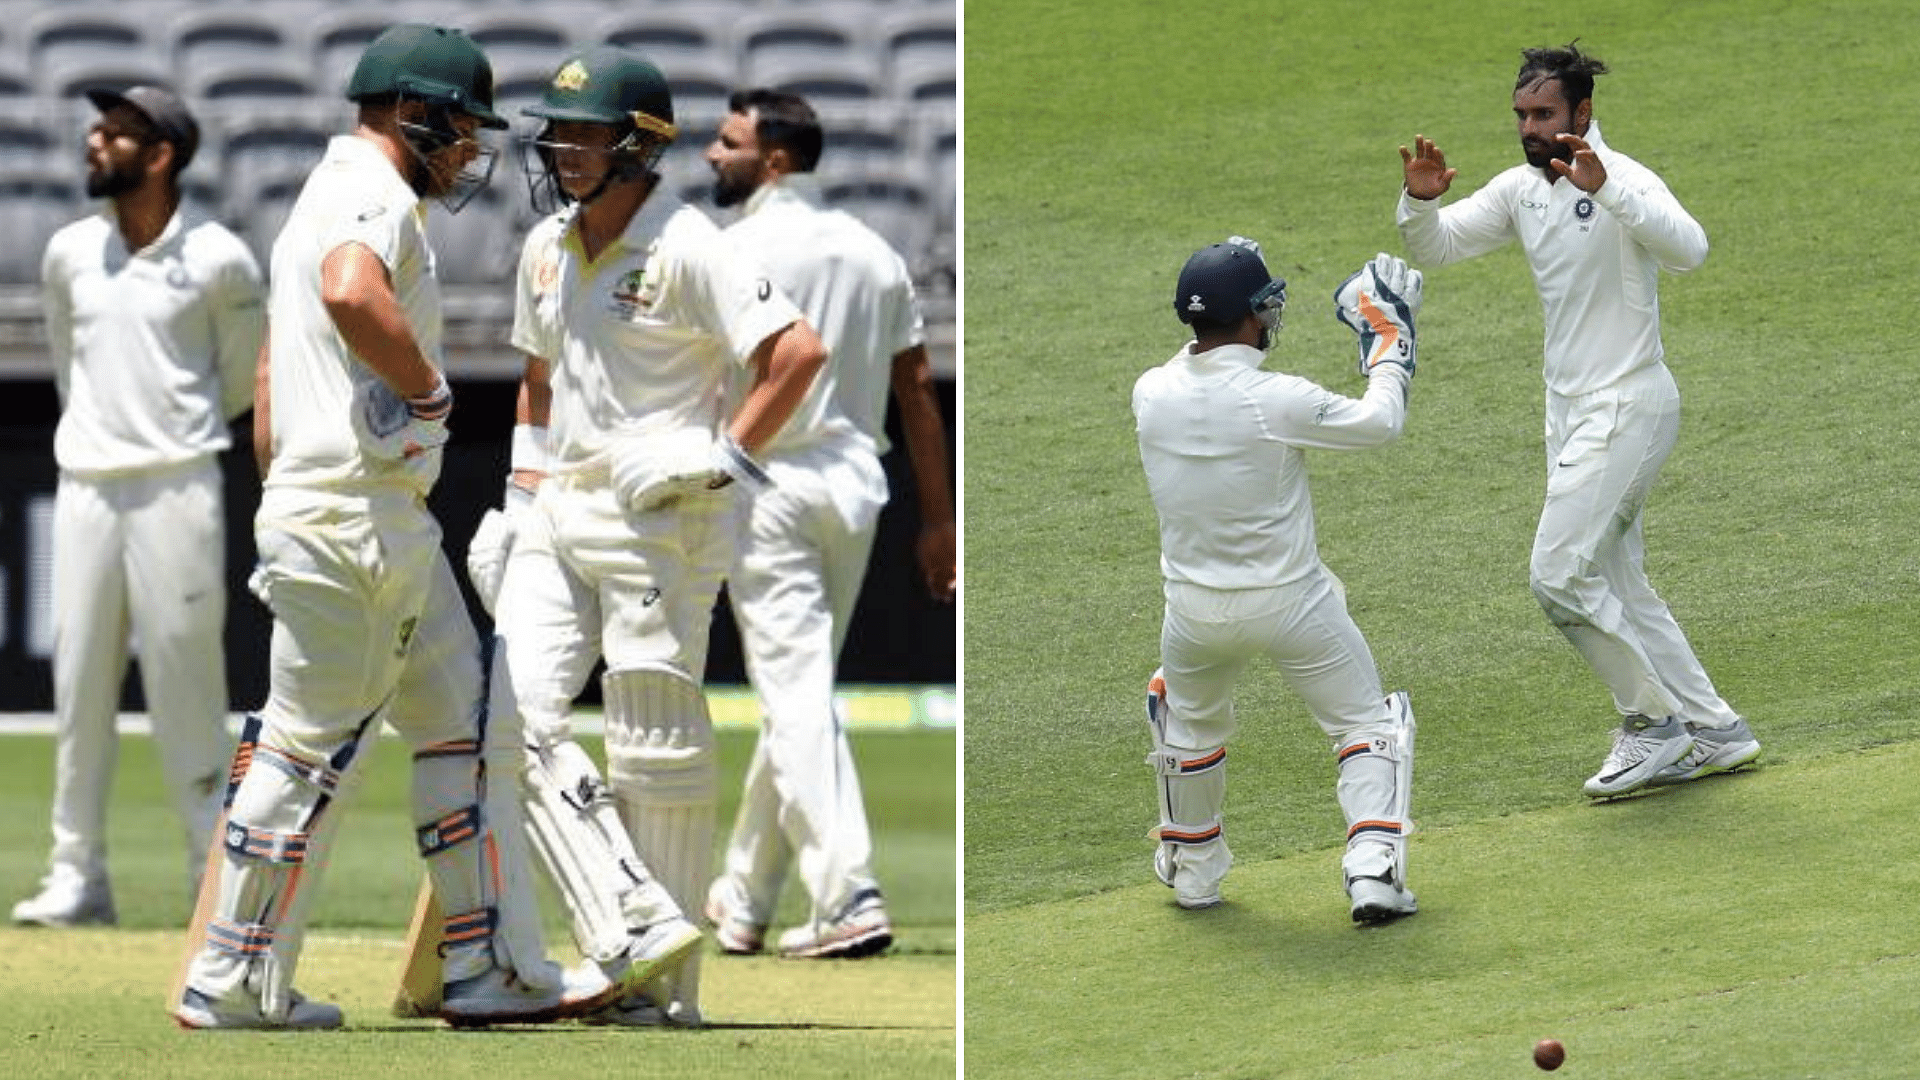 Aaron Finch and Marcus Harris shared the series’ first 100-run stand, while Hanuma Vihari was India’s surprise star with the ball on Day 1 at Perth.